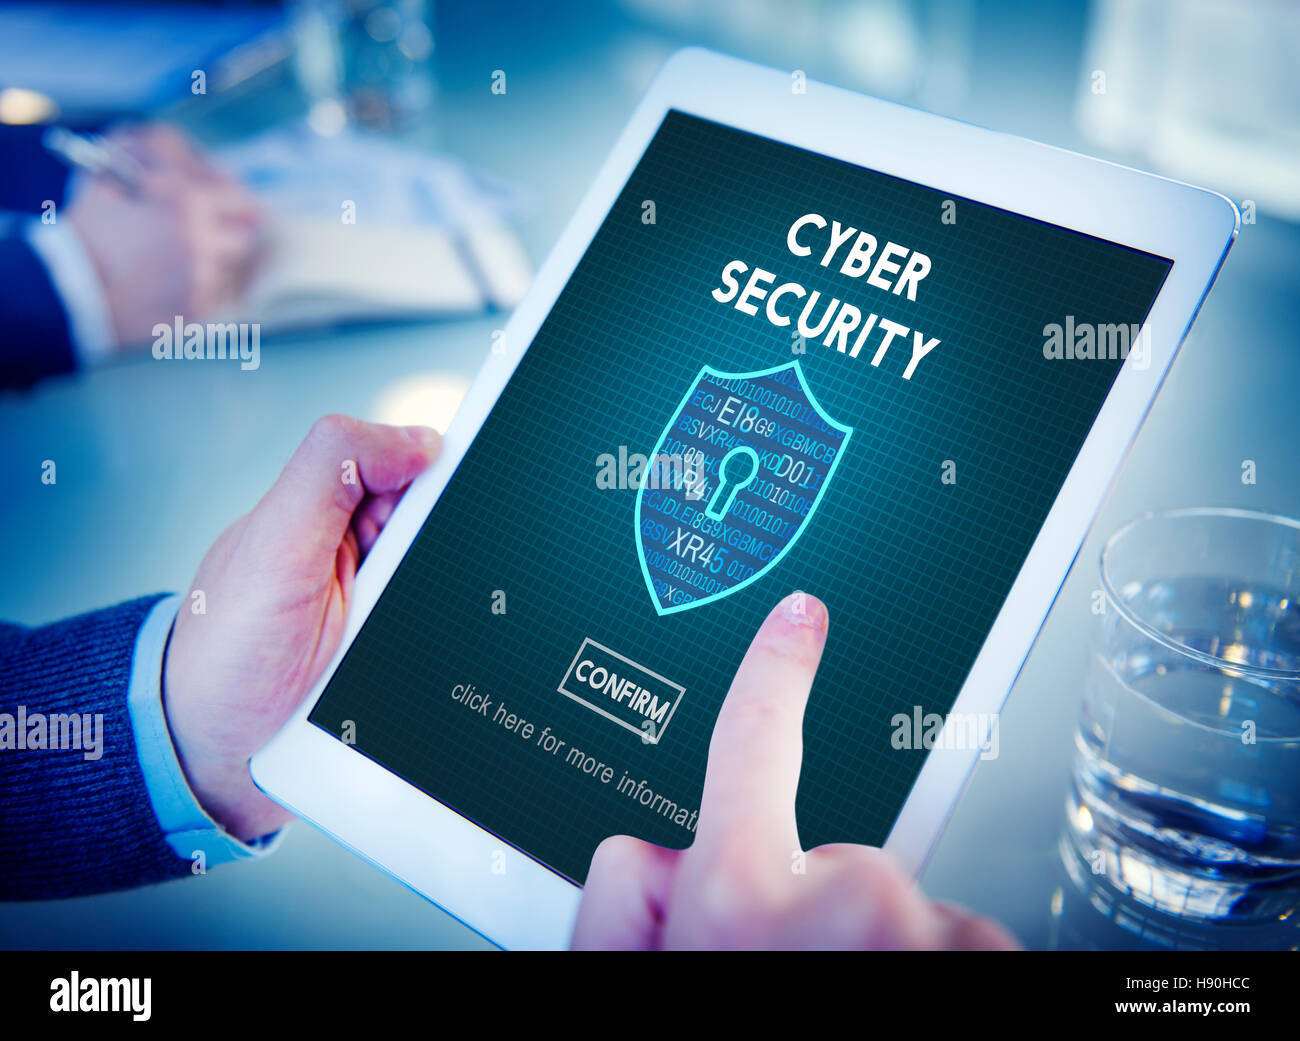 Cyber Security Protection Firewall Interface Concept Stock Photo